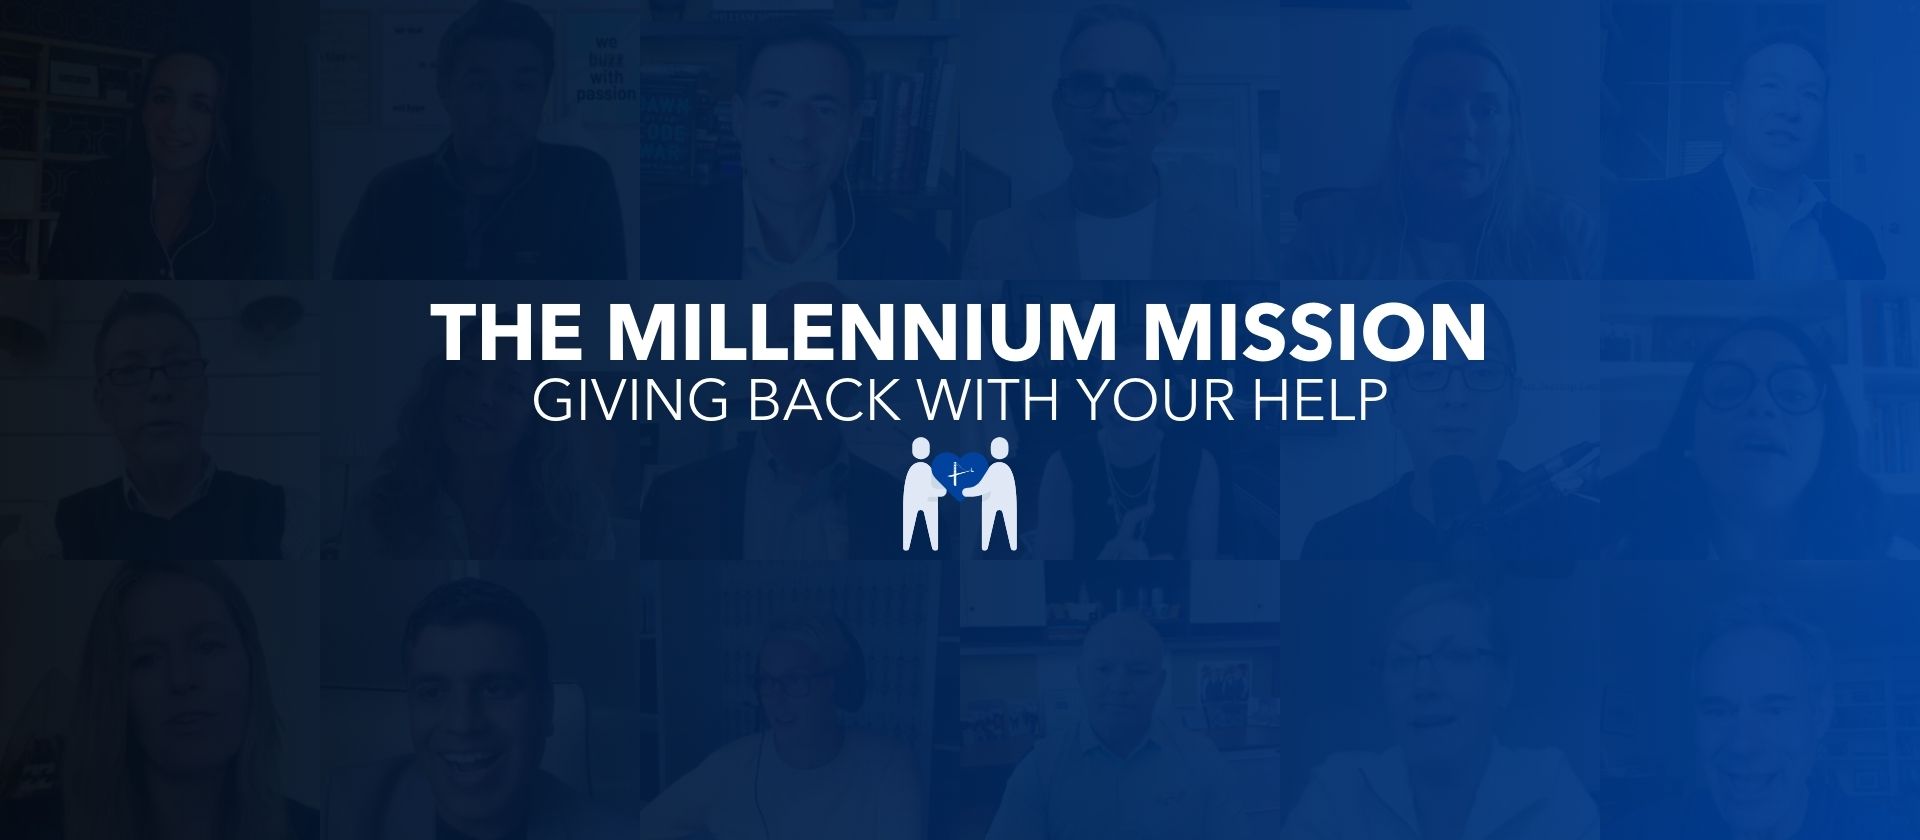 The Millennium Alliance Launches Its New Charitable Initiative, The Millennium Mission